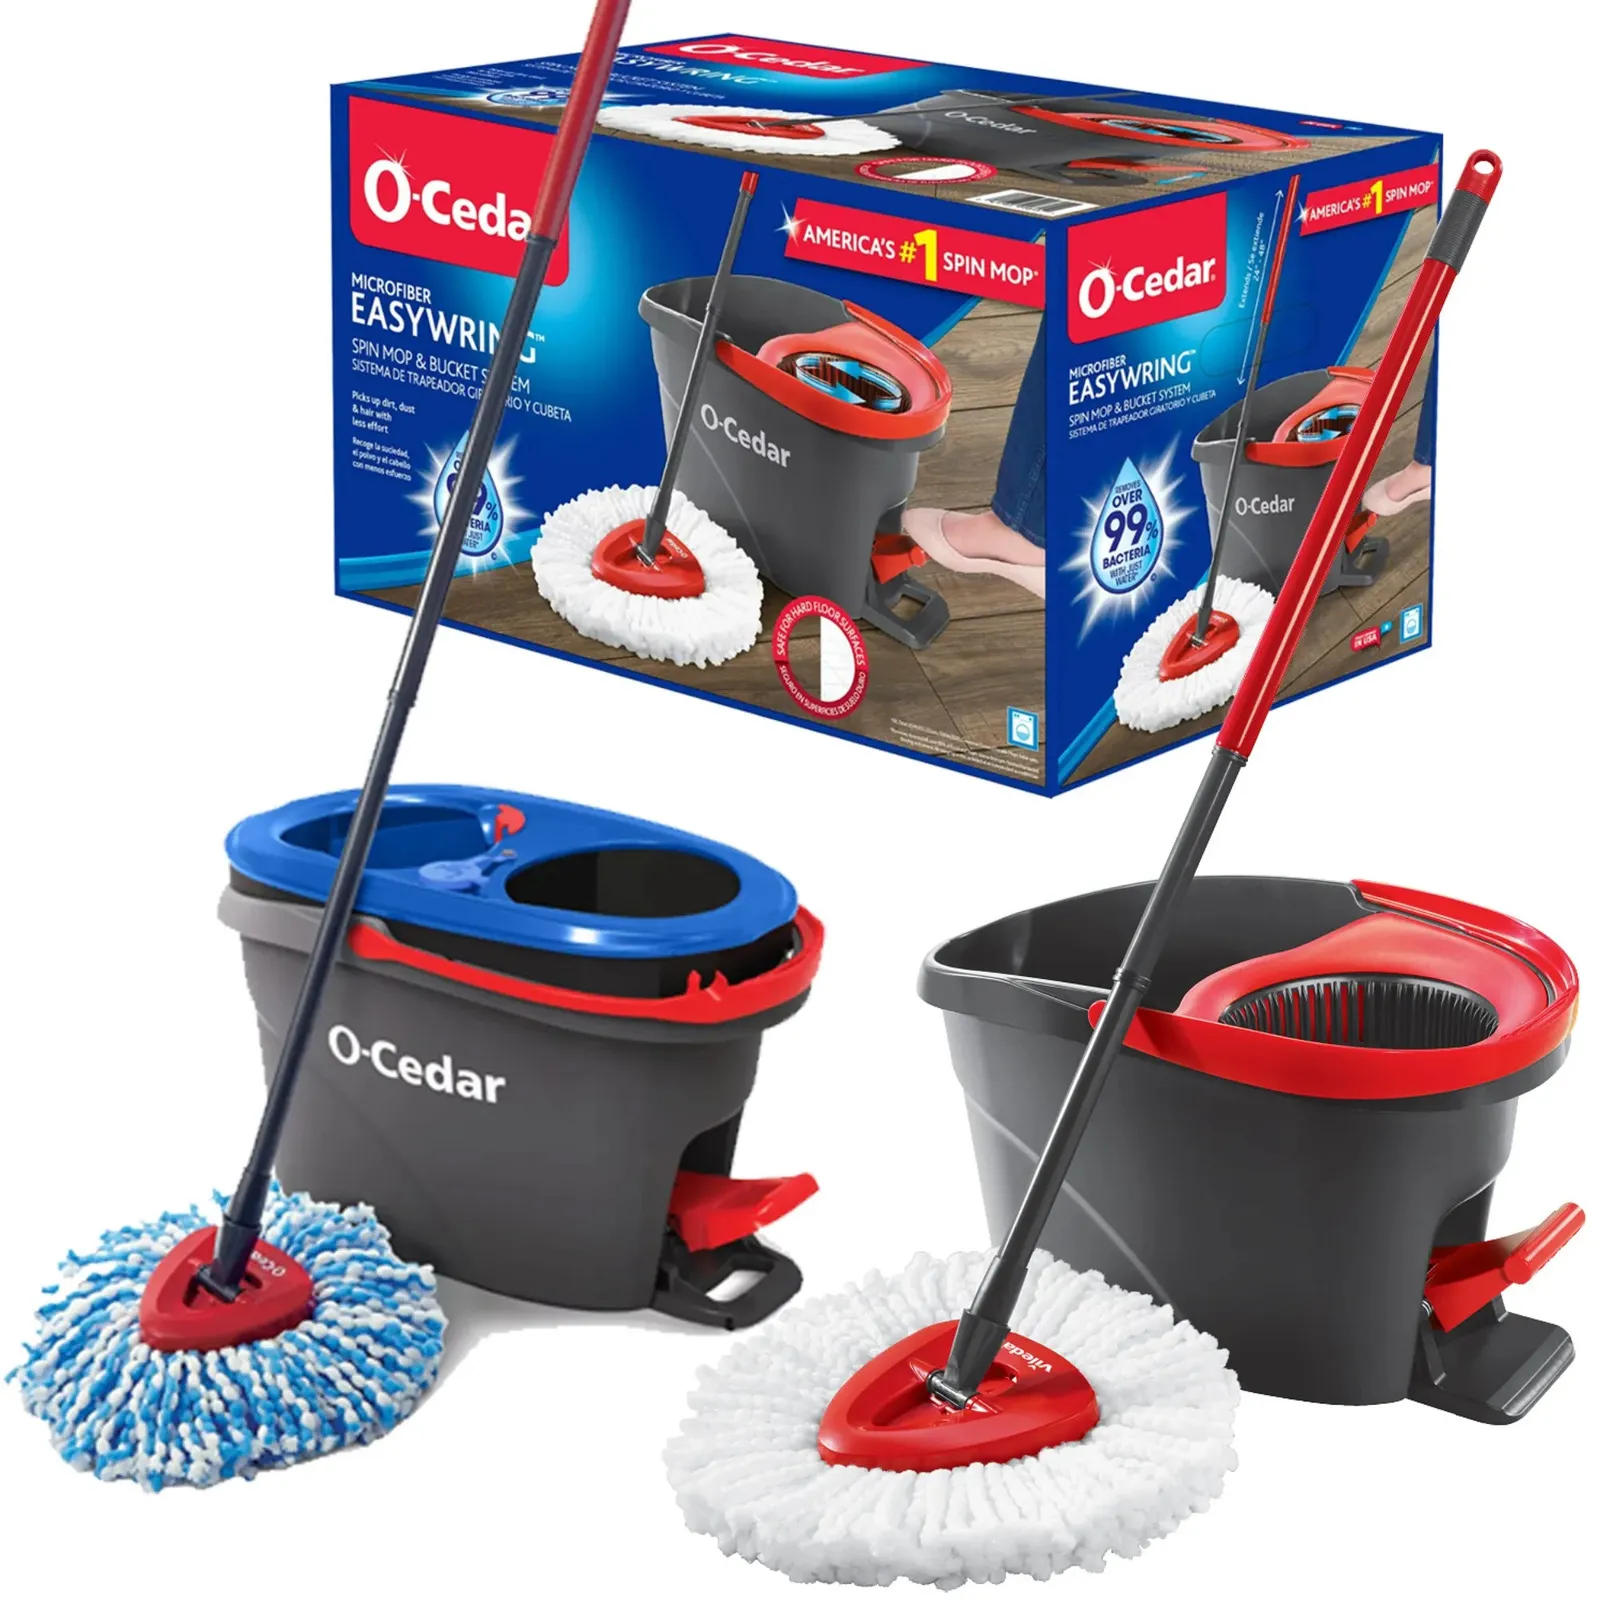 Mops Foot activated Pedal Spin Mop Bucket System Hands Free 231206